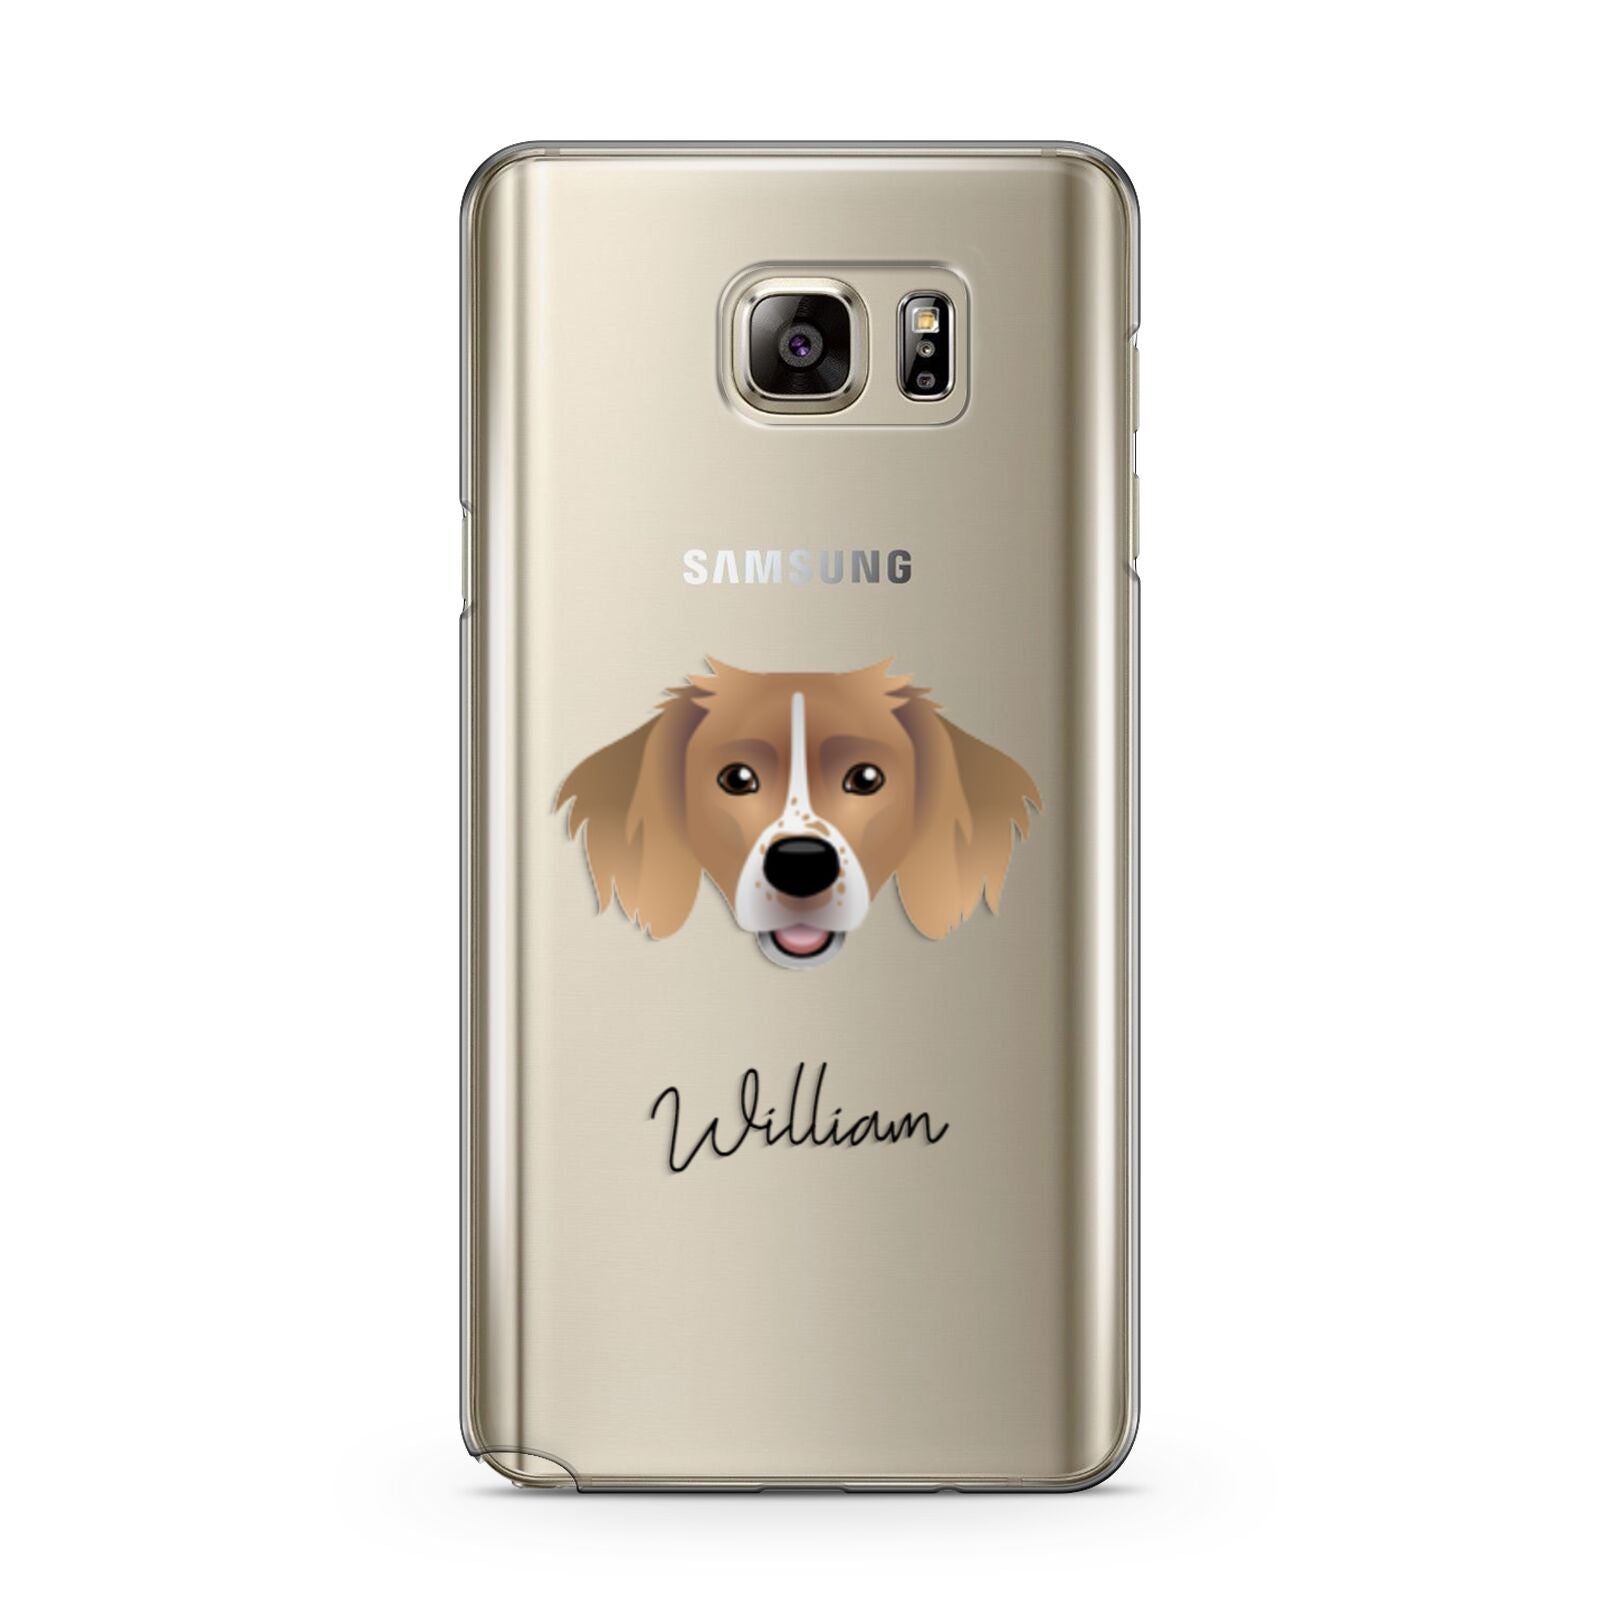 Sprollie Personalised Samsung Galaxy Note 5 Case